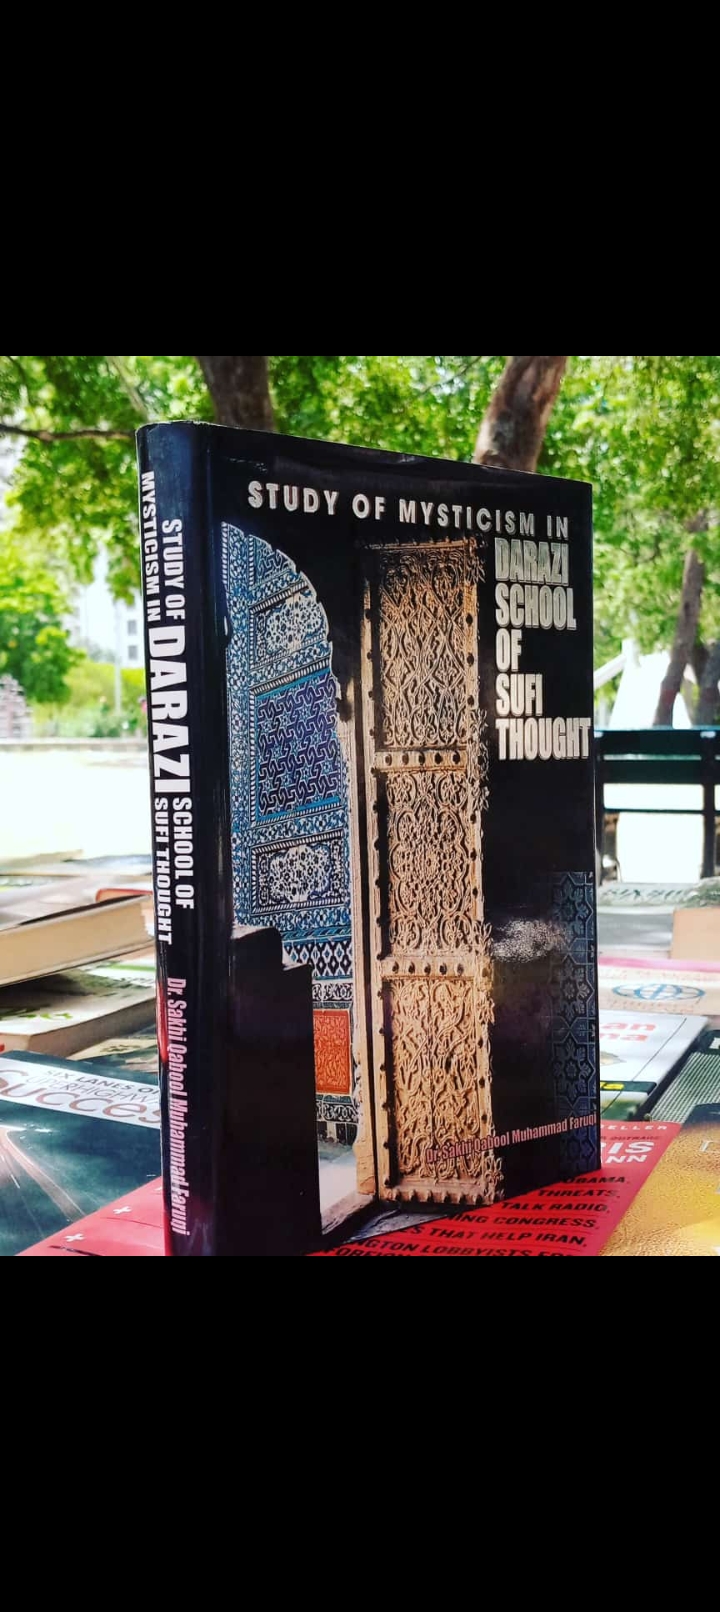 study of mysticism in darazi school of sufi thought by dr.sakhi. original hardcover rs.1450 delivery